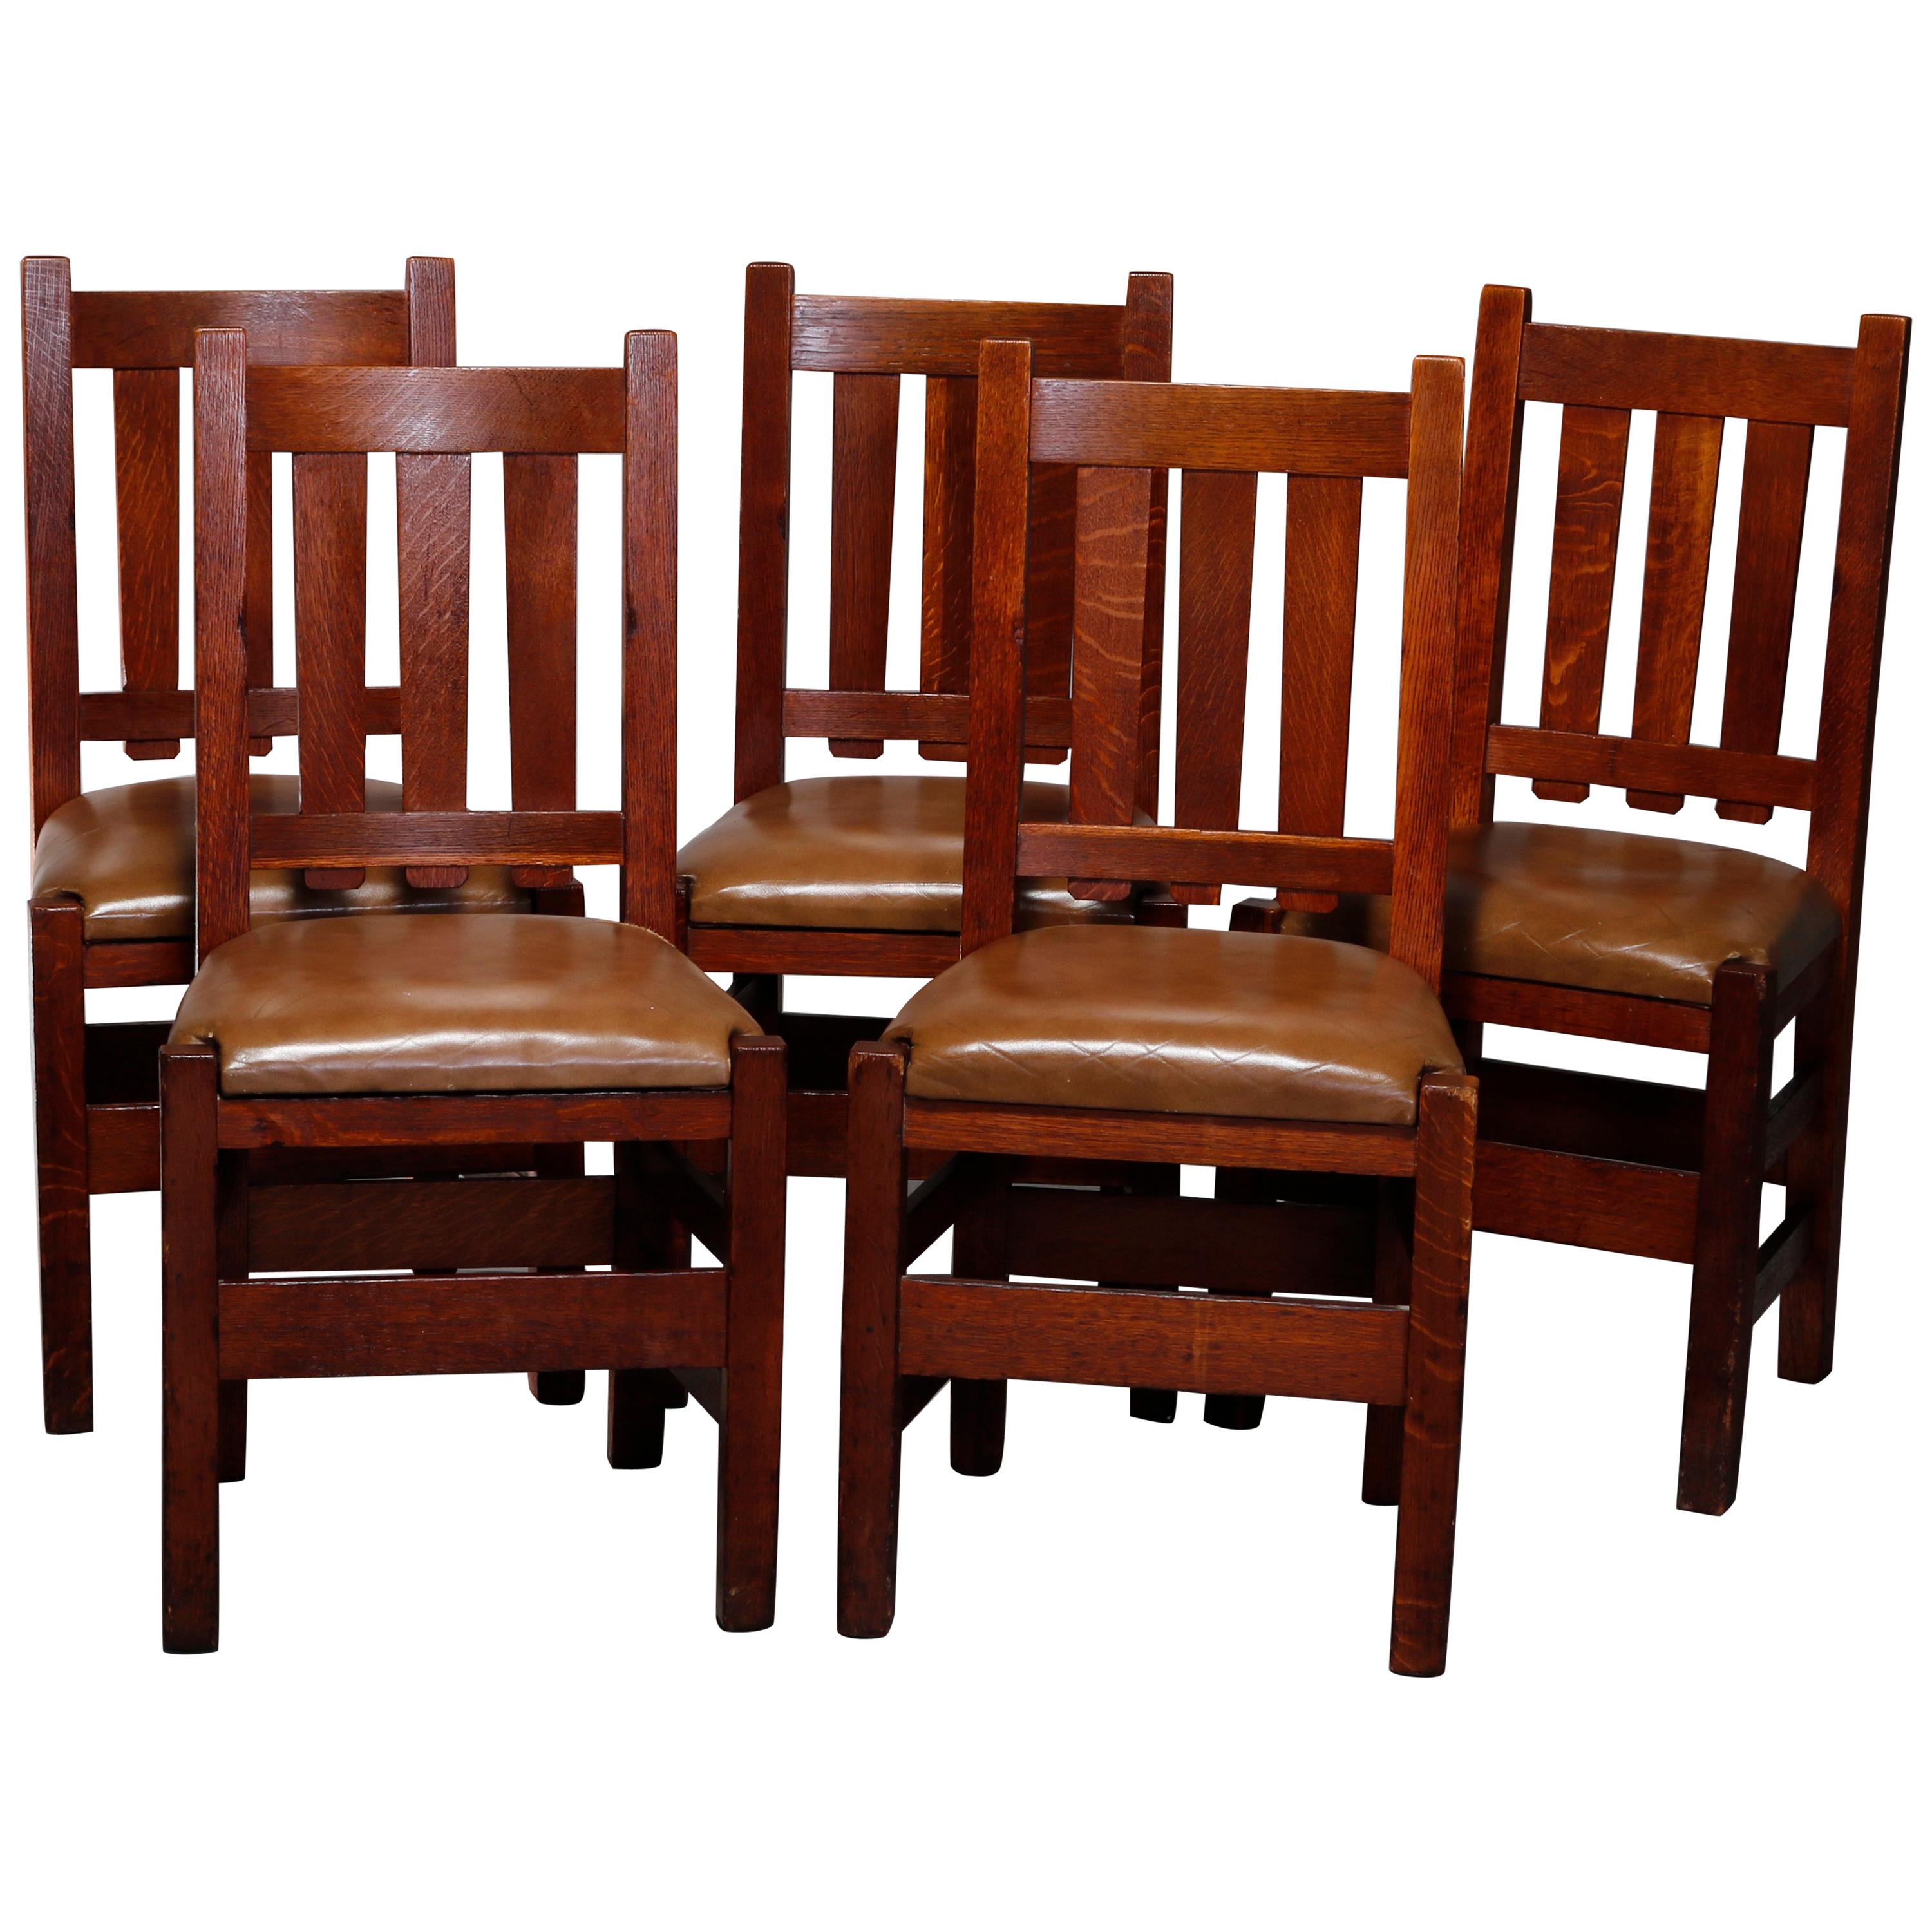 Five Antique Arts & Crafts Mission Oak and Leather Chairs attr Stickley Bros